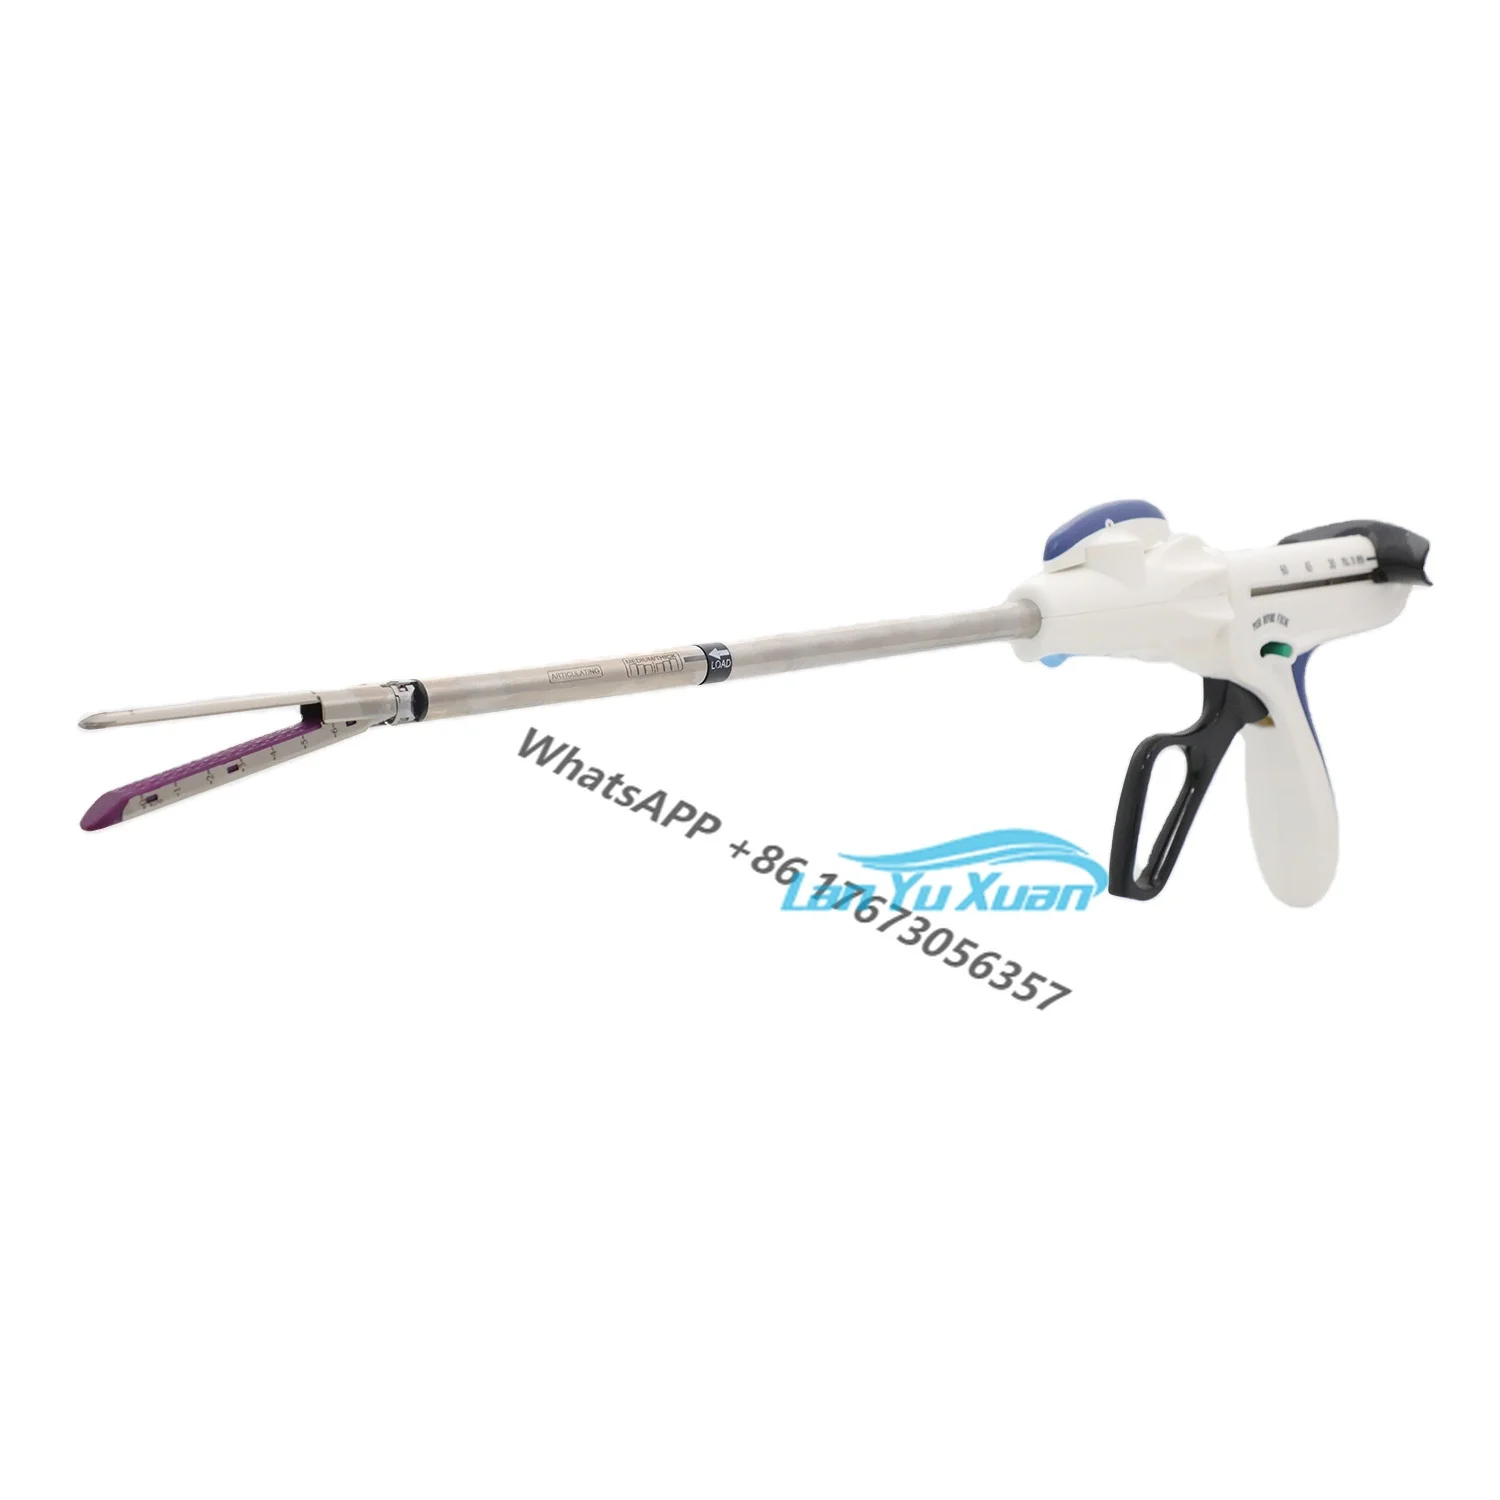 

Endoscopic Linear Cutter Stapler Reloads Endo and Loading Cartridge